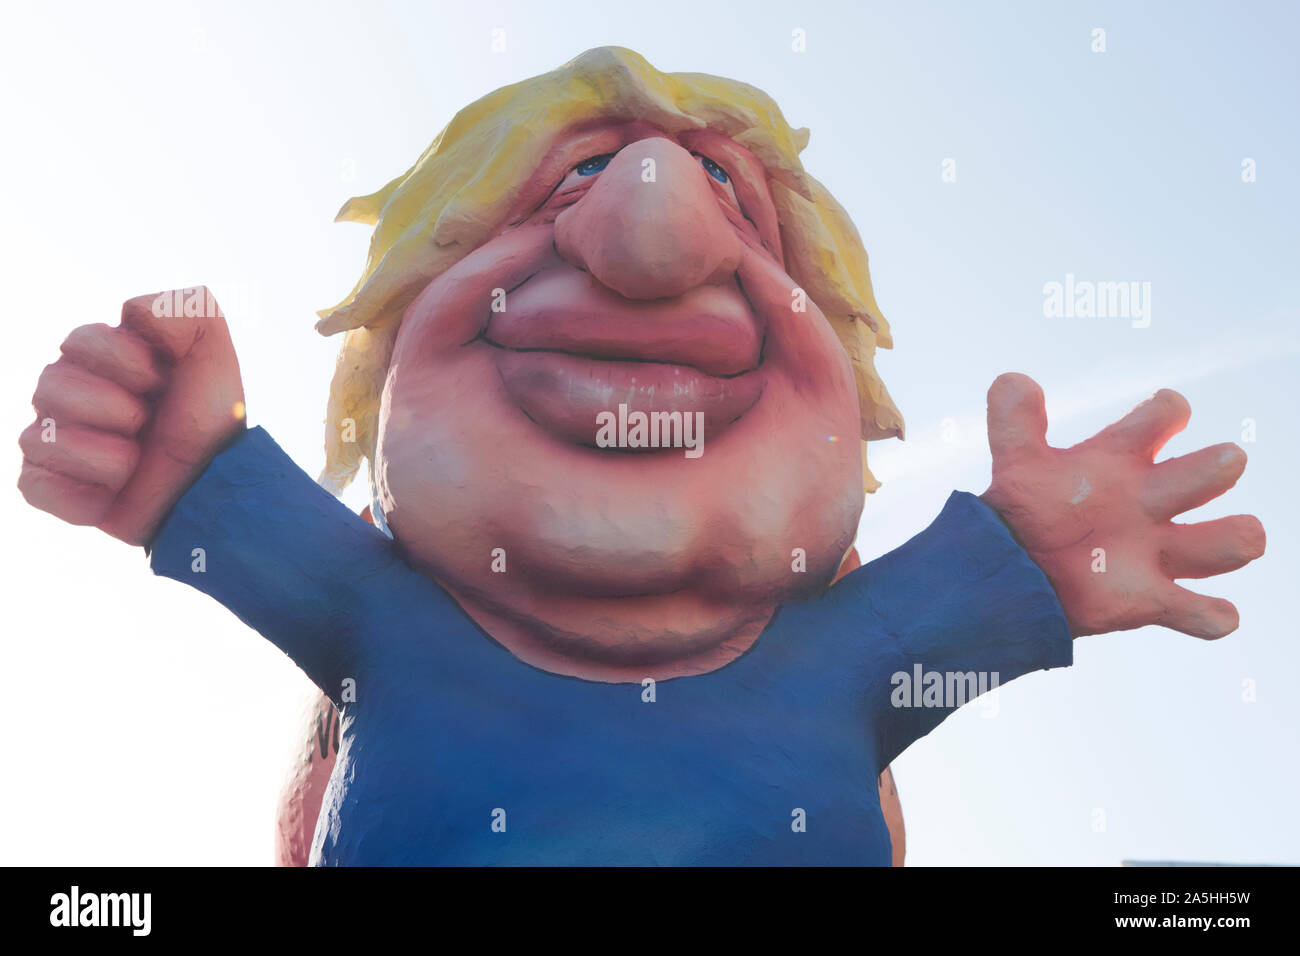 Boris Johnson 2019 Conservative Prime Minister giant cartoon caricature effigy paraded through street of London during the Brexit deadlock in the House of Commons. Parliament Square Brexit Super Saturday. 19 th October 2019 HOMER SYKES Stock Photo